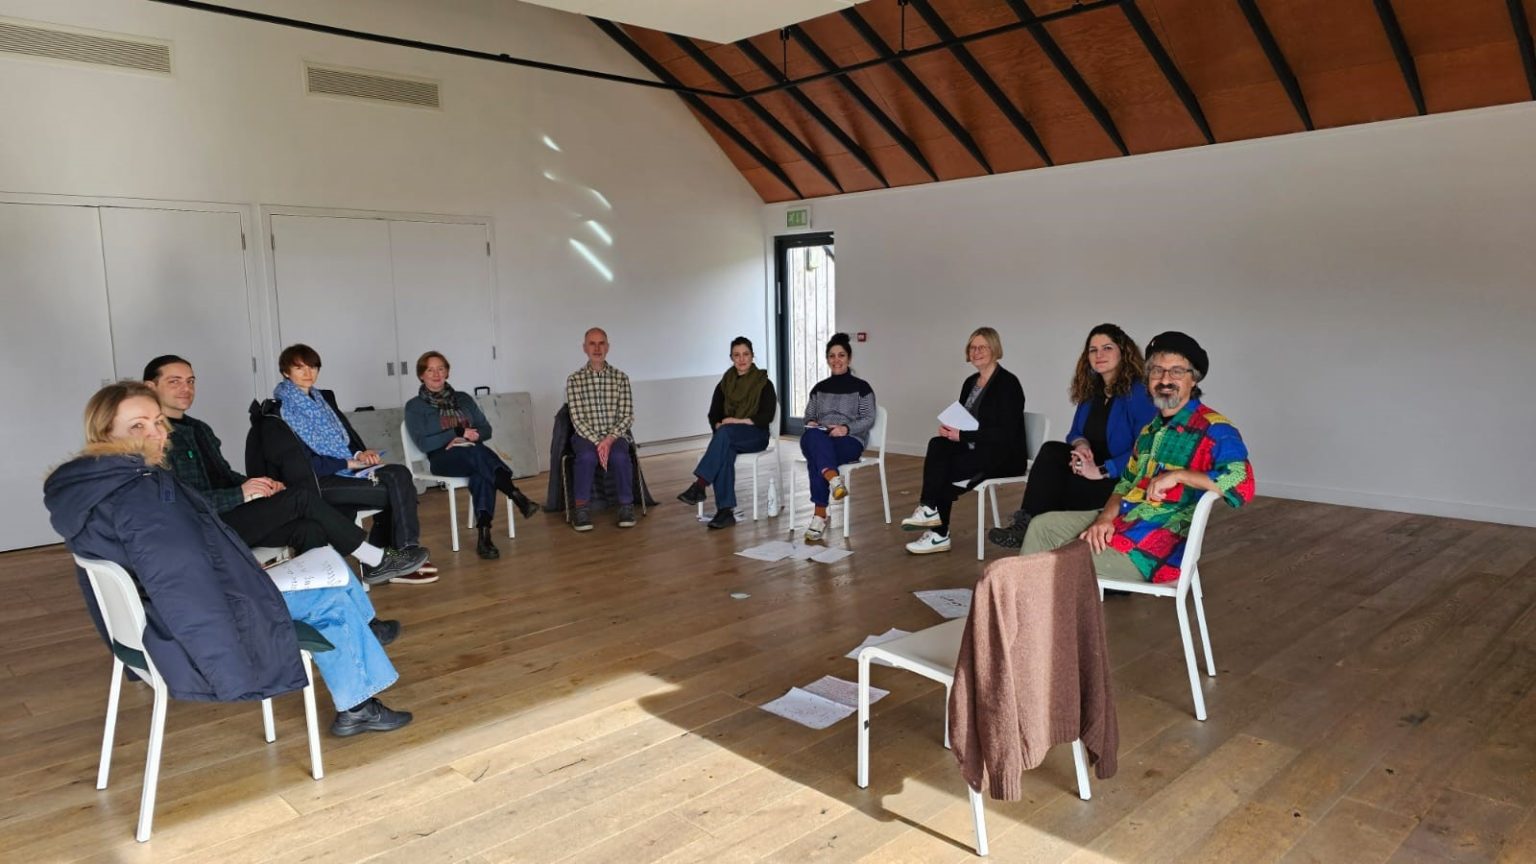 A group of artists sat together in a circle, in the middle of a bright spacious room,